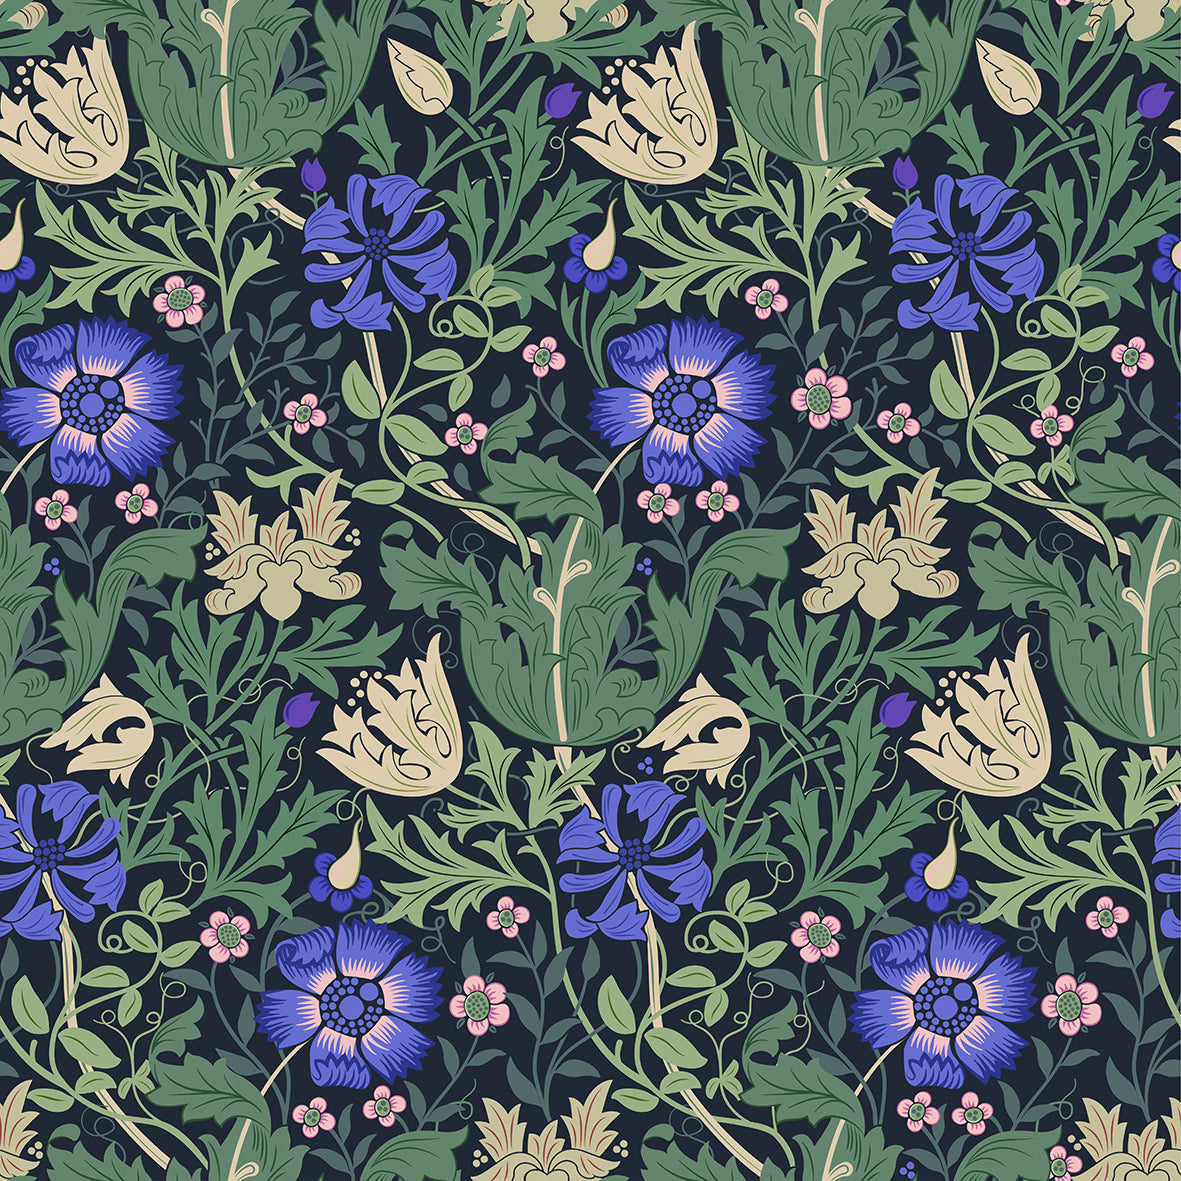 william-morris-co-microfibre-duvet-cover-compton-collection-bluebell-cottage-2